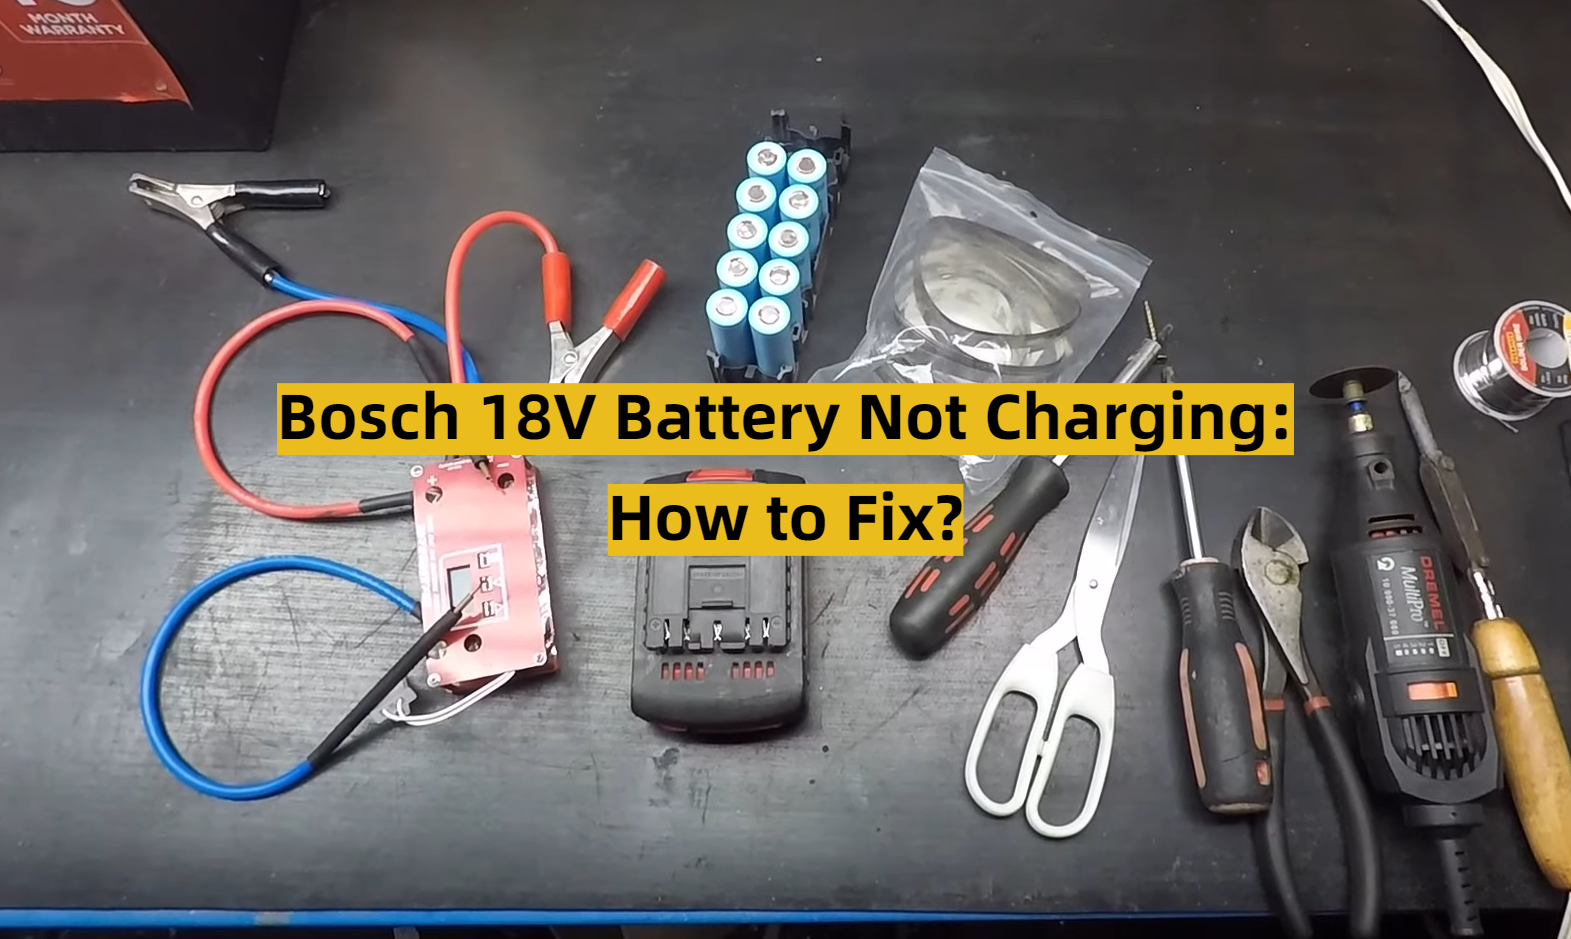 Bosch 18V Battery Not Charging: How to Fix?